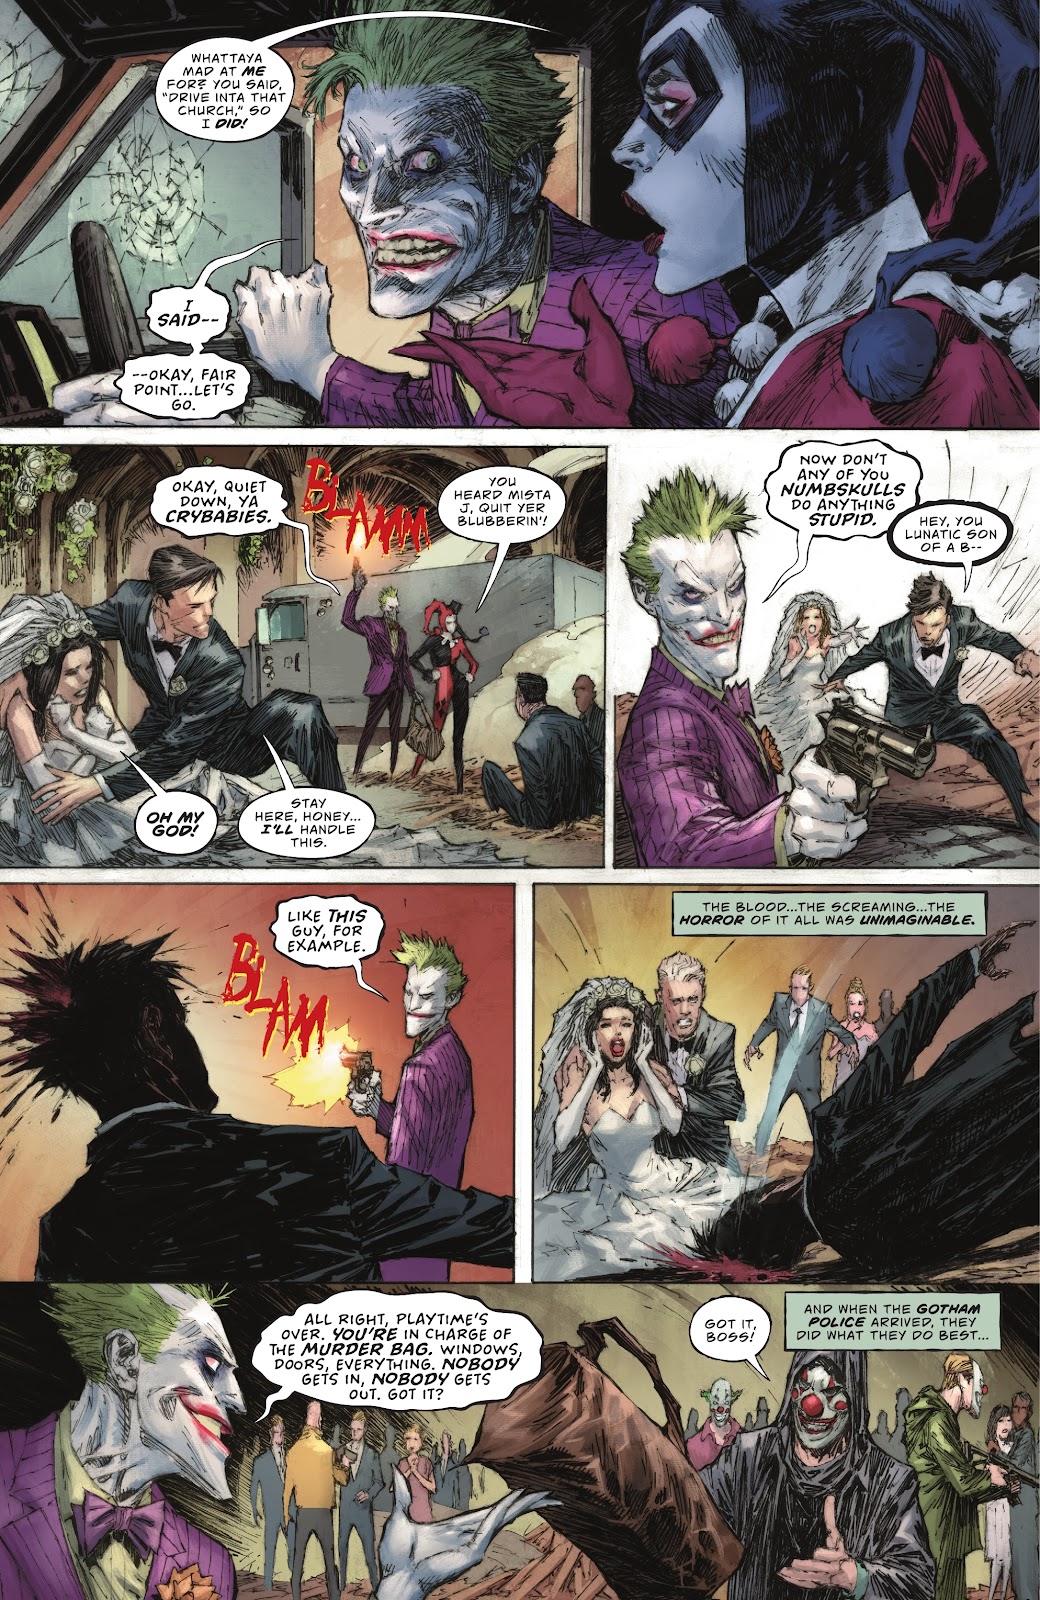 Batman & The Joker: The Deadly Duo issue 4 - Page 6